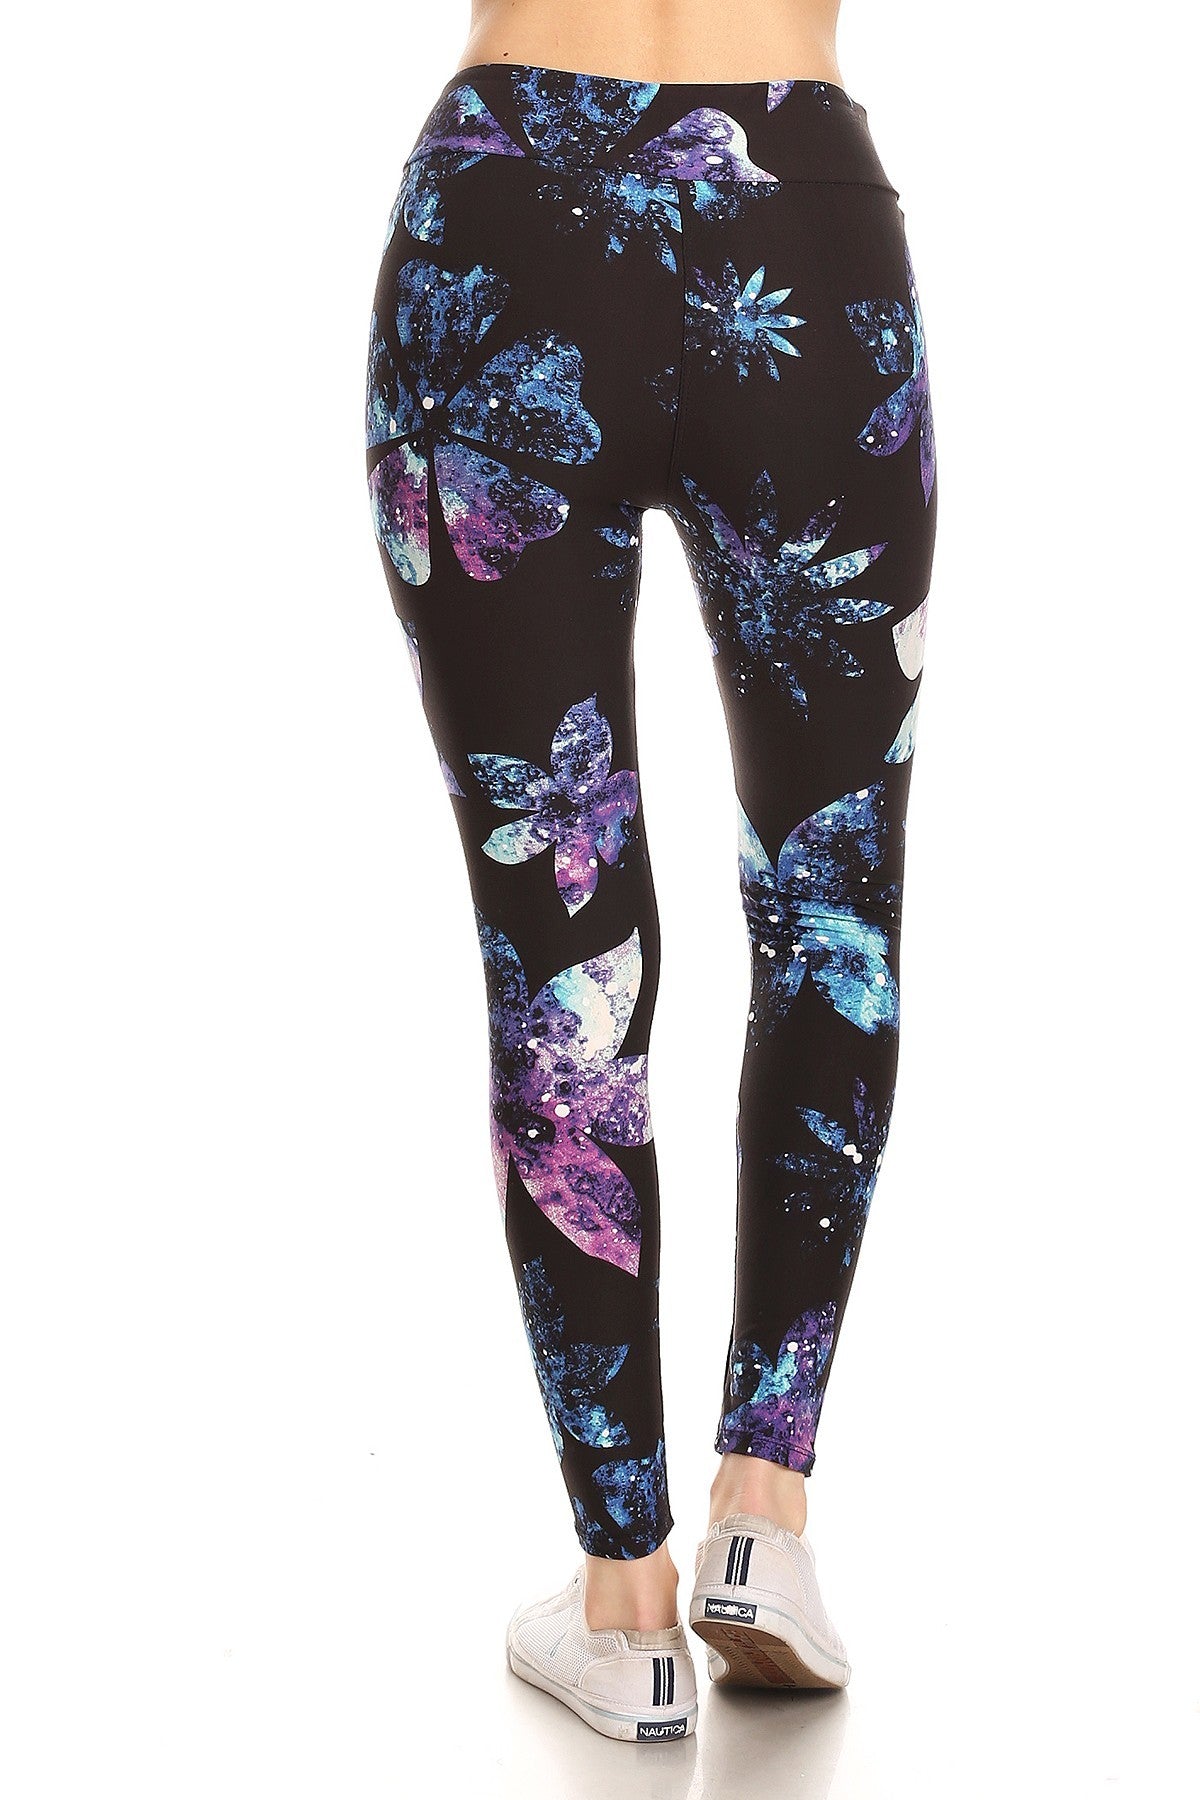 Yoga Style Banded Lined Galaxy Silhouette Floral Print, Full Length Leggings In A Slim Fitting Style With A Banded High Waist - Love It Clothing